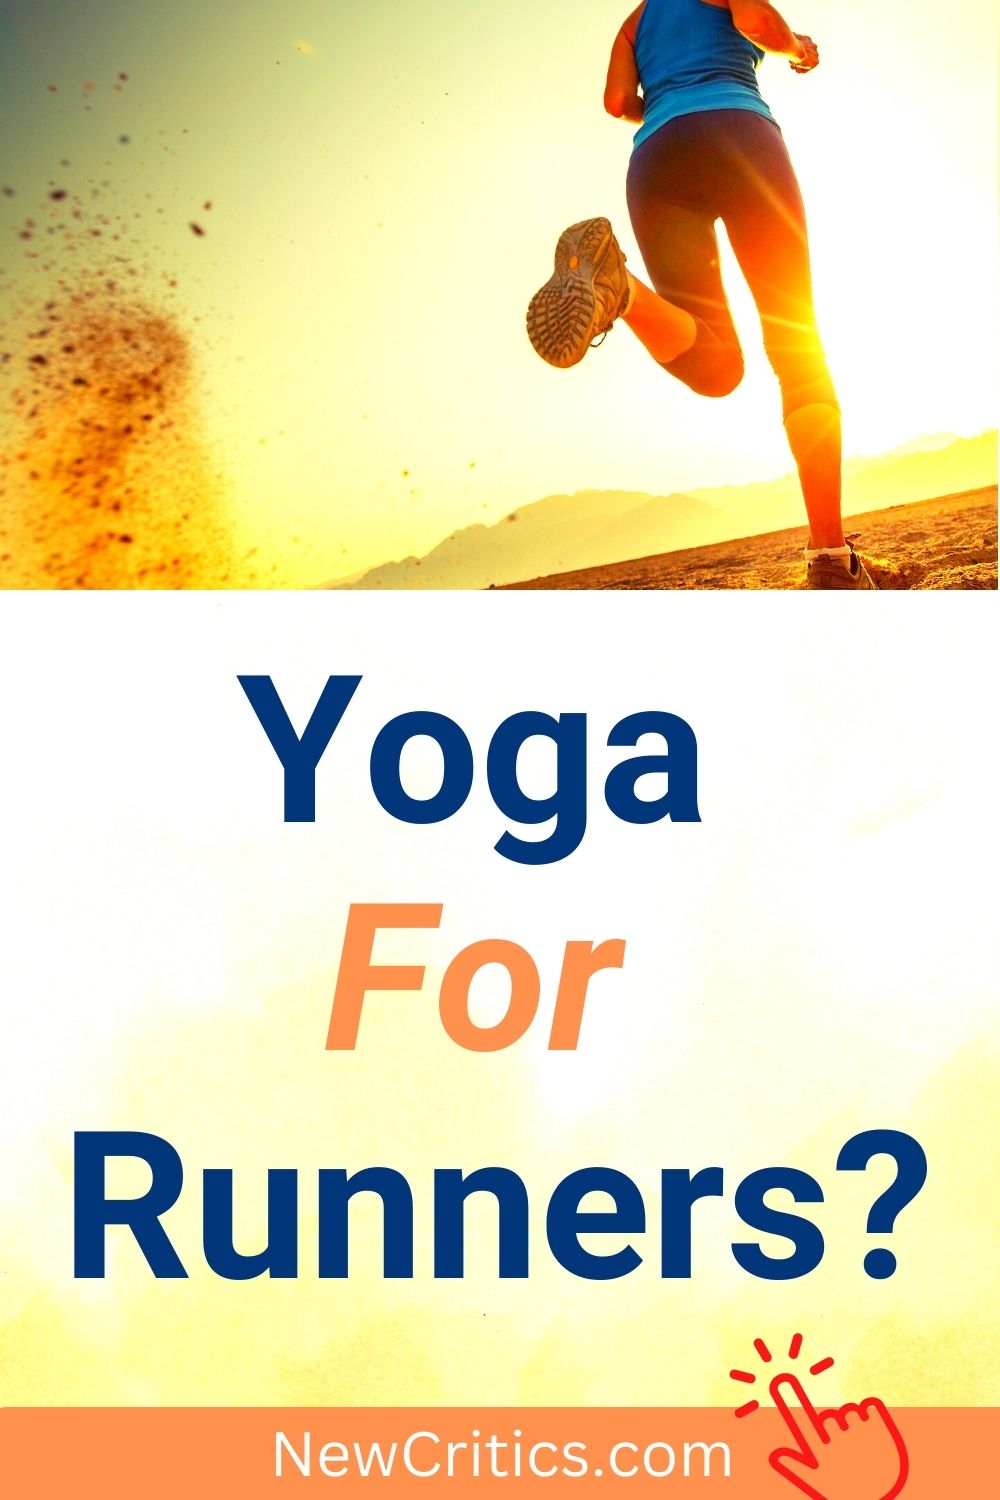 Yoga For Runners / Canva